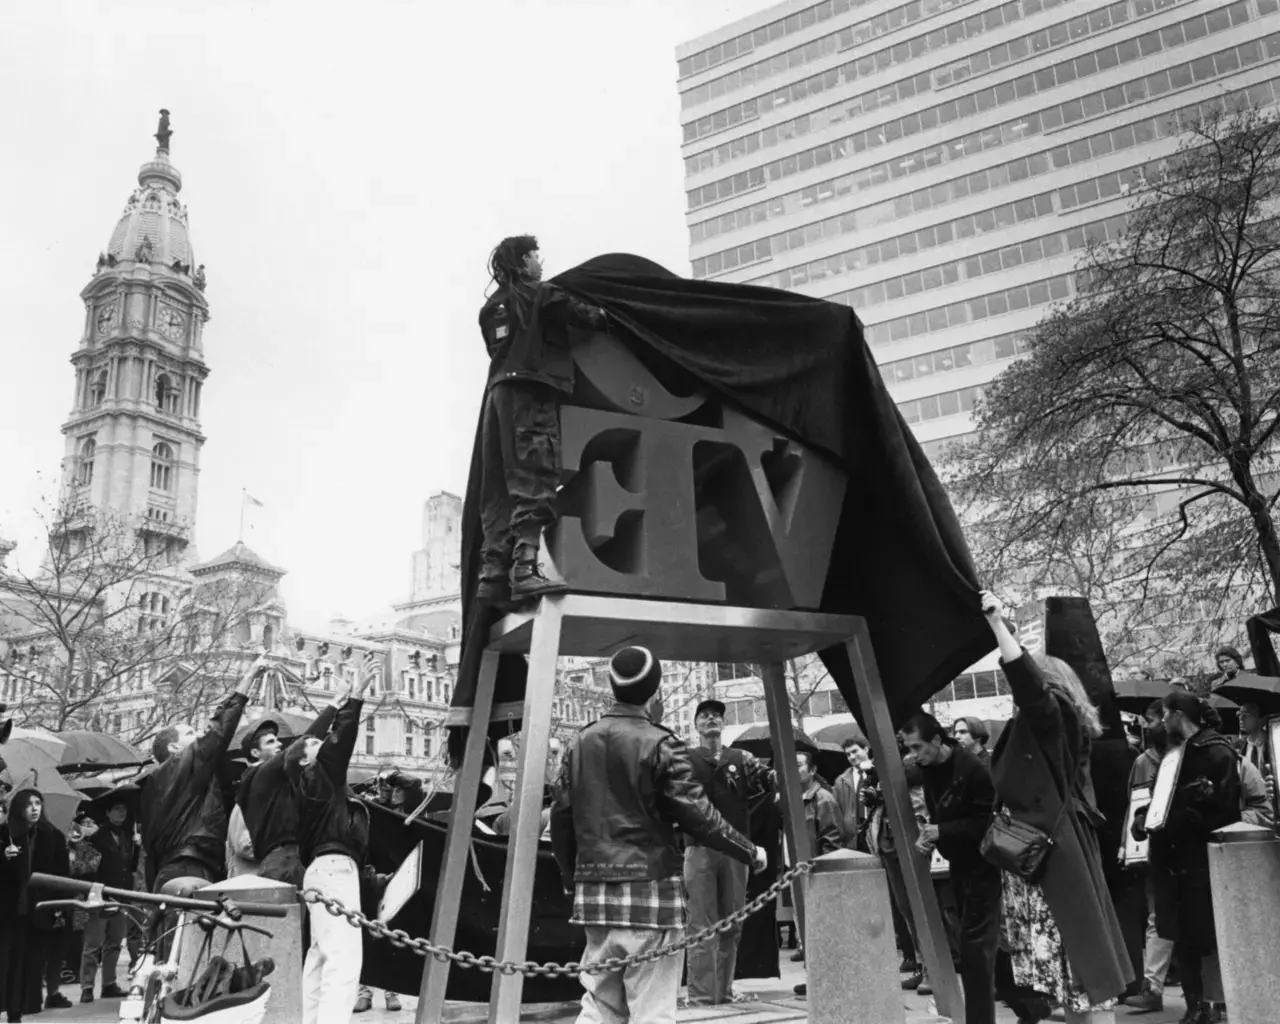 Shrouding of the LOVE sculpture in John F. Kennedy Plaza, Philadelphia, World AIDS Day / Day Without Art, 1992. Photo by Office of the City Representative, City of Philadelphia, courtesy of the John J. Wilcox, Jr. Archives, William Way LGBT Community Center.&nbsp;